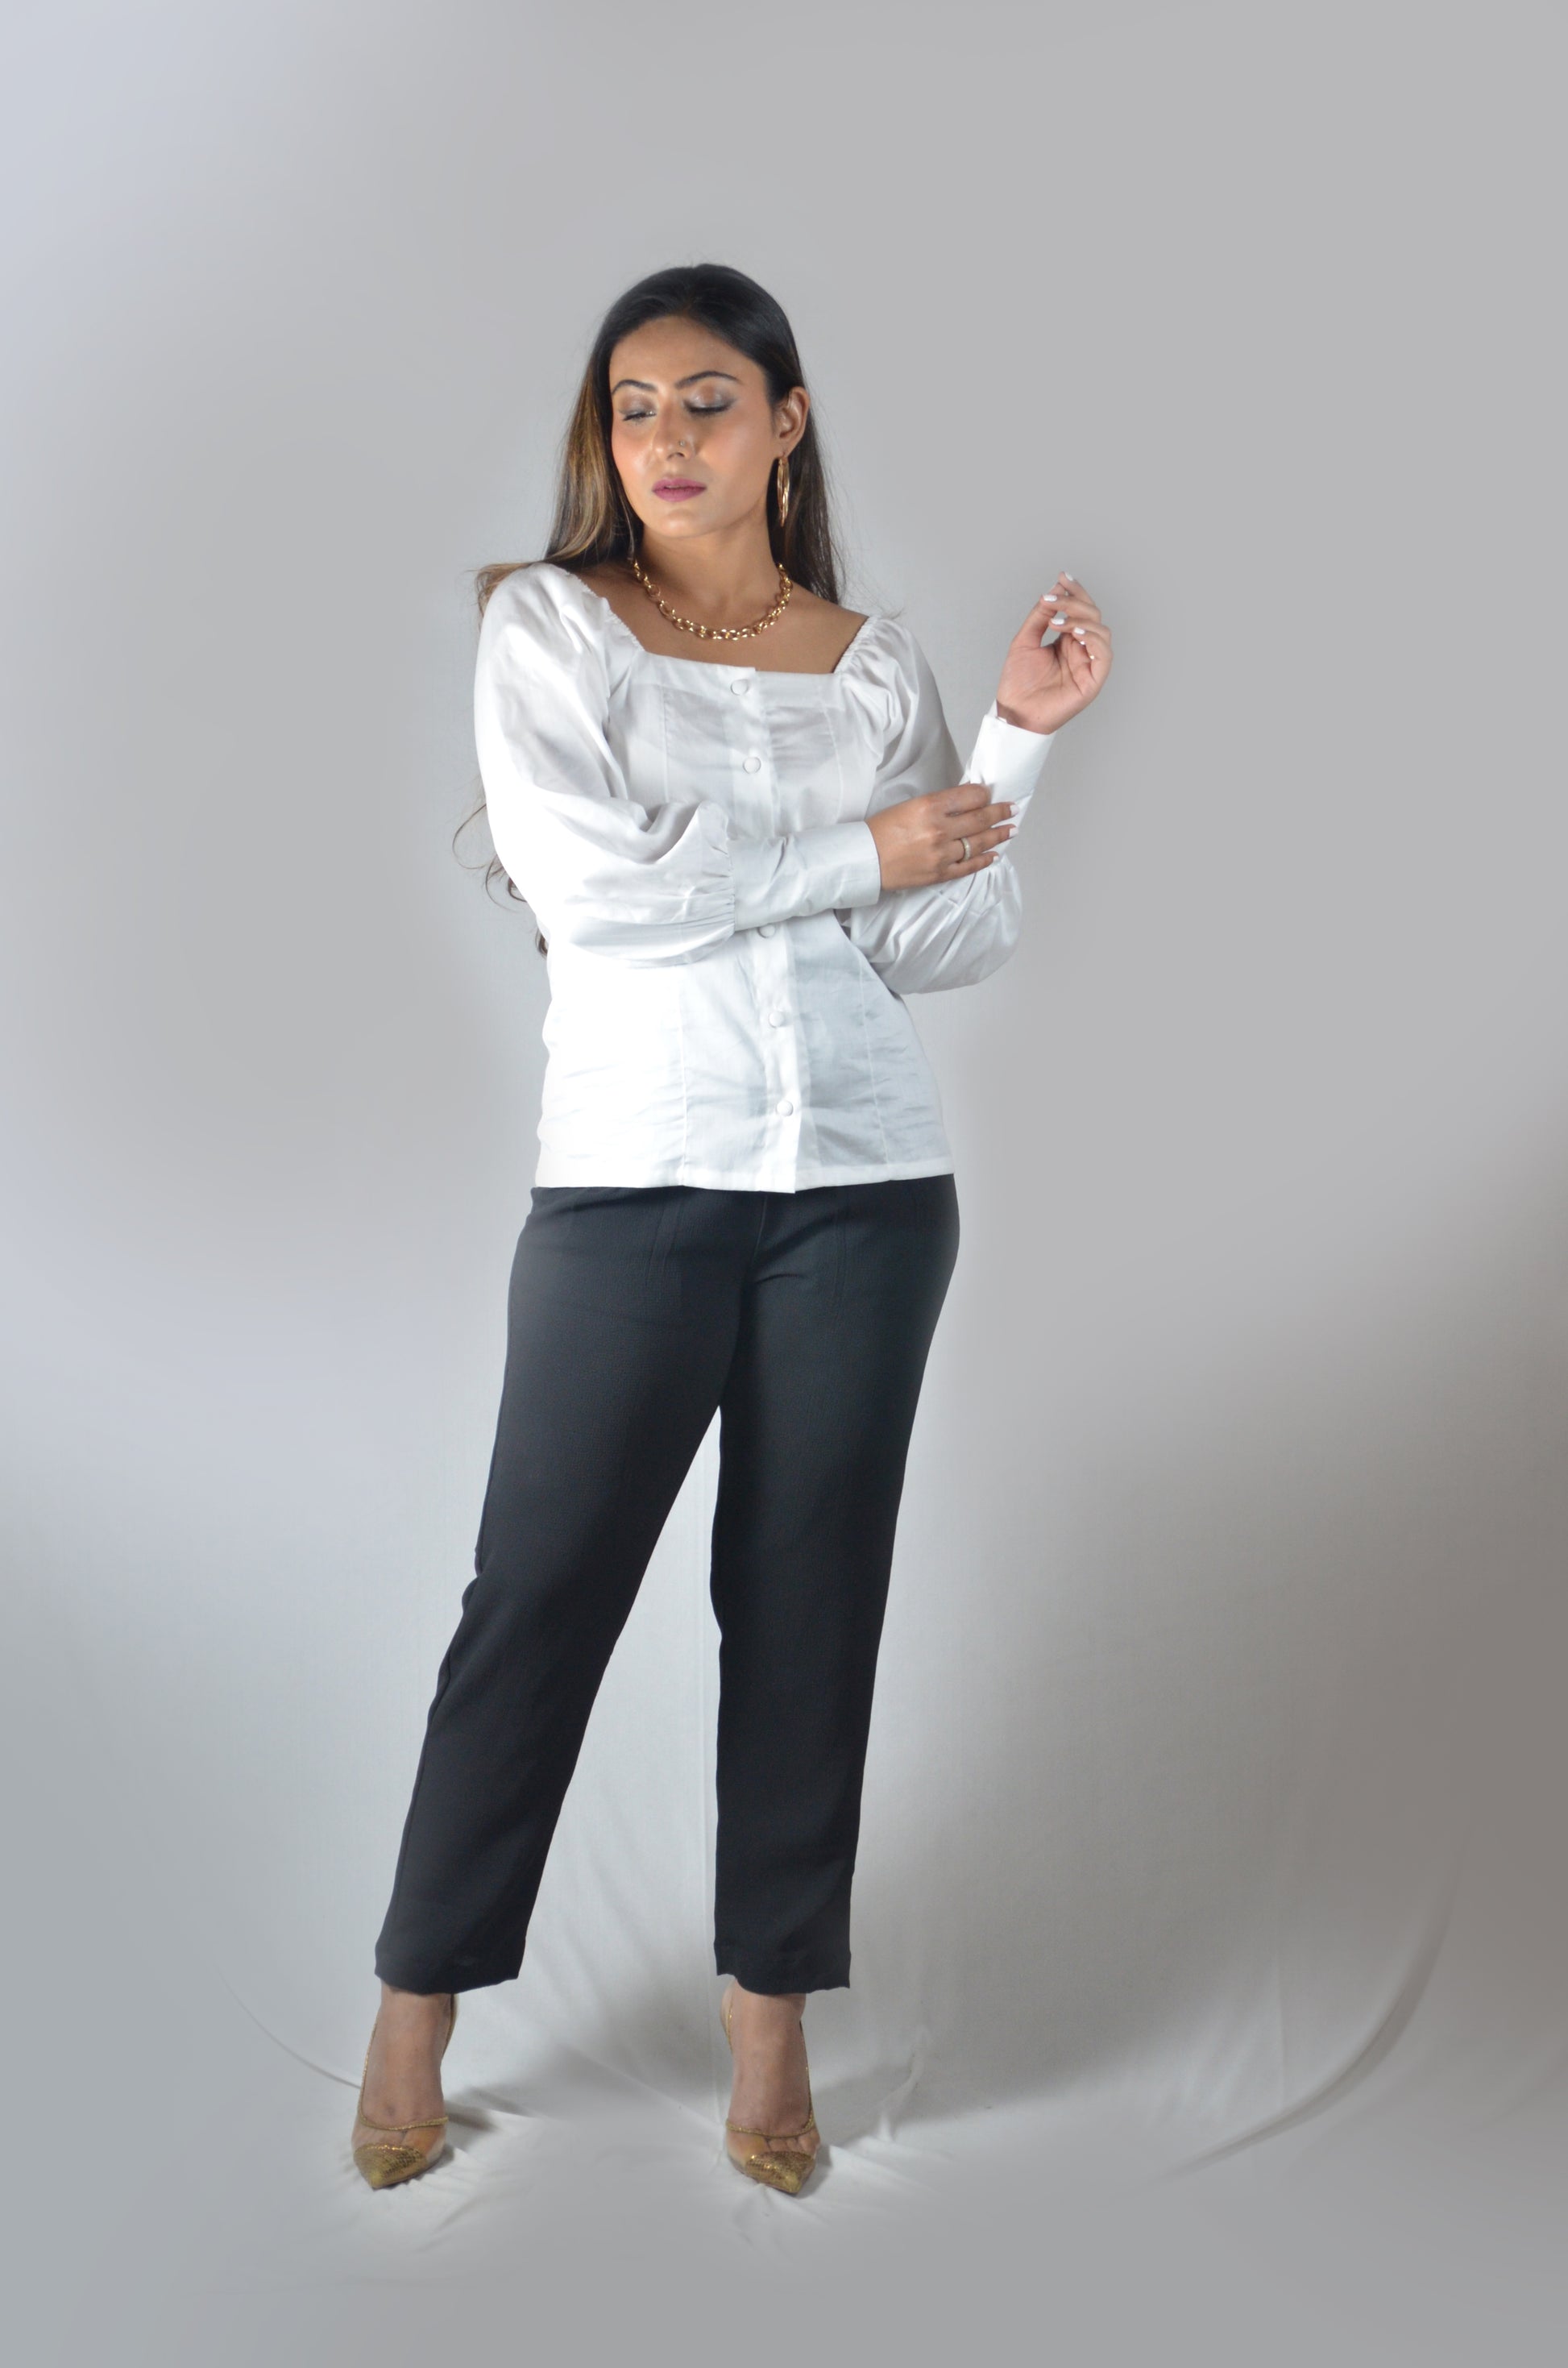 women western wear fashion. Classic white shirt with balloon sleeves. Formal wear, office wear, casual top, party tops